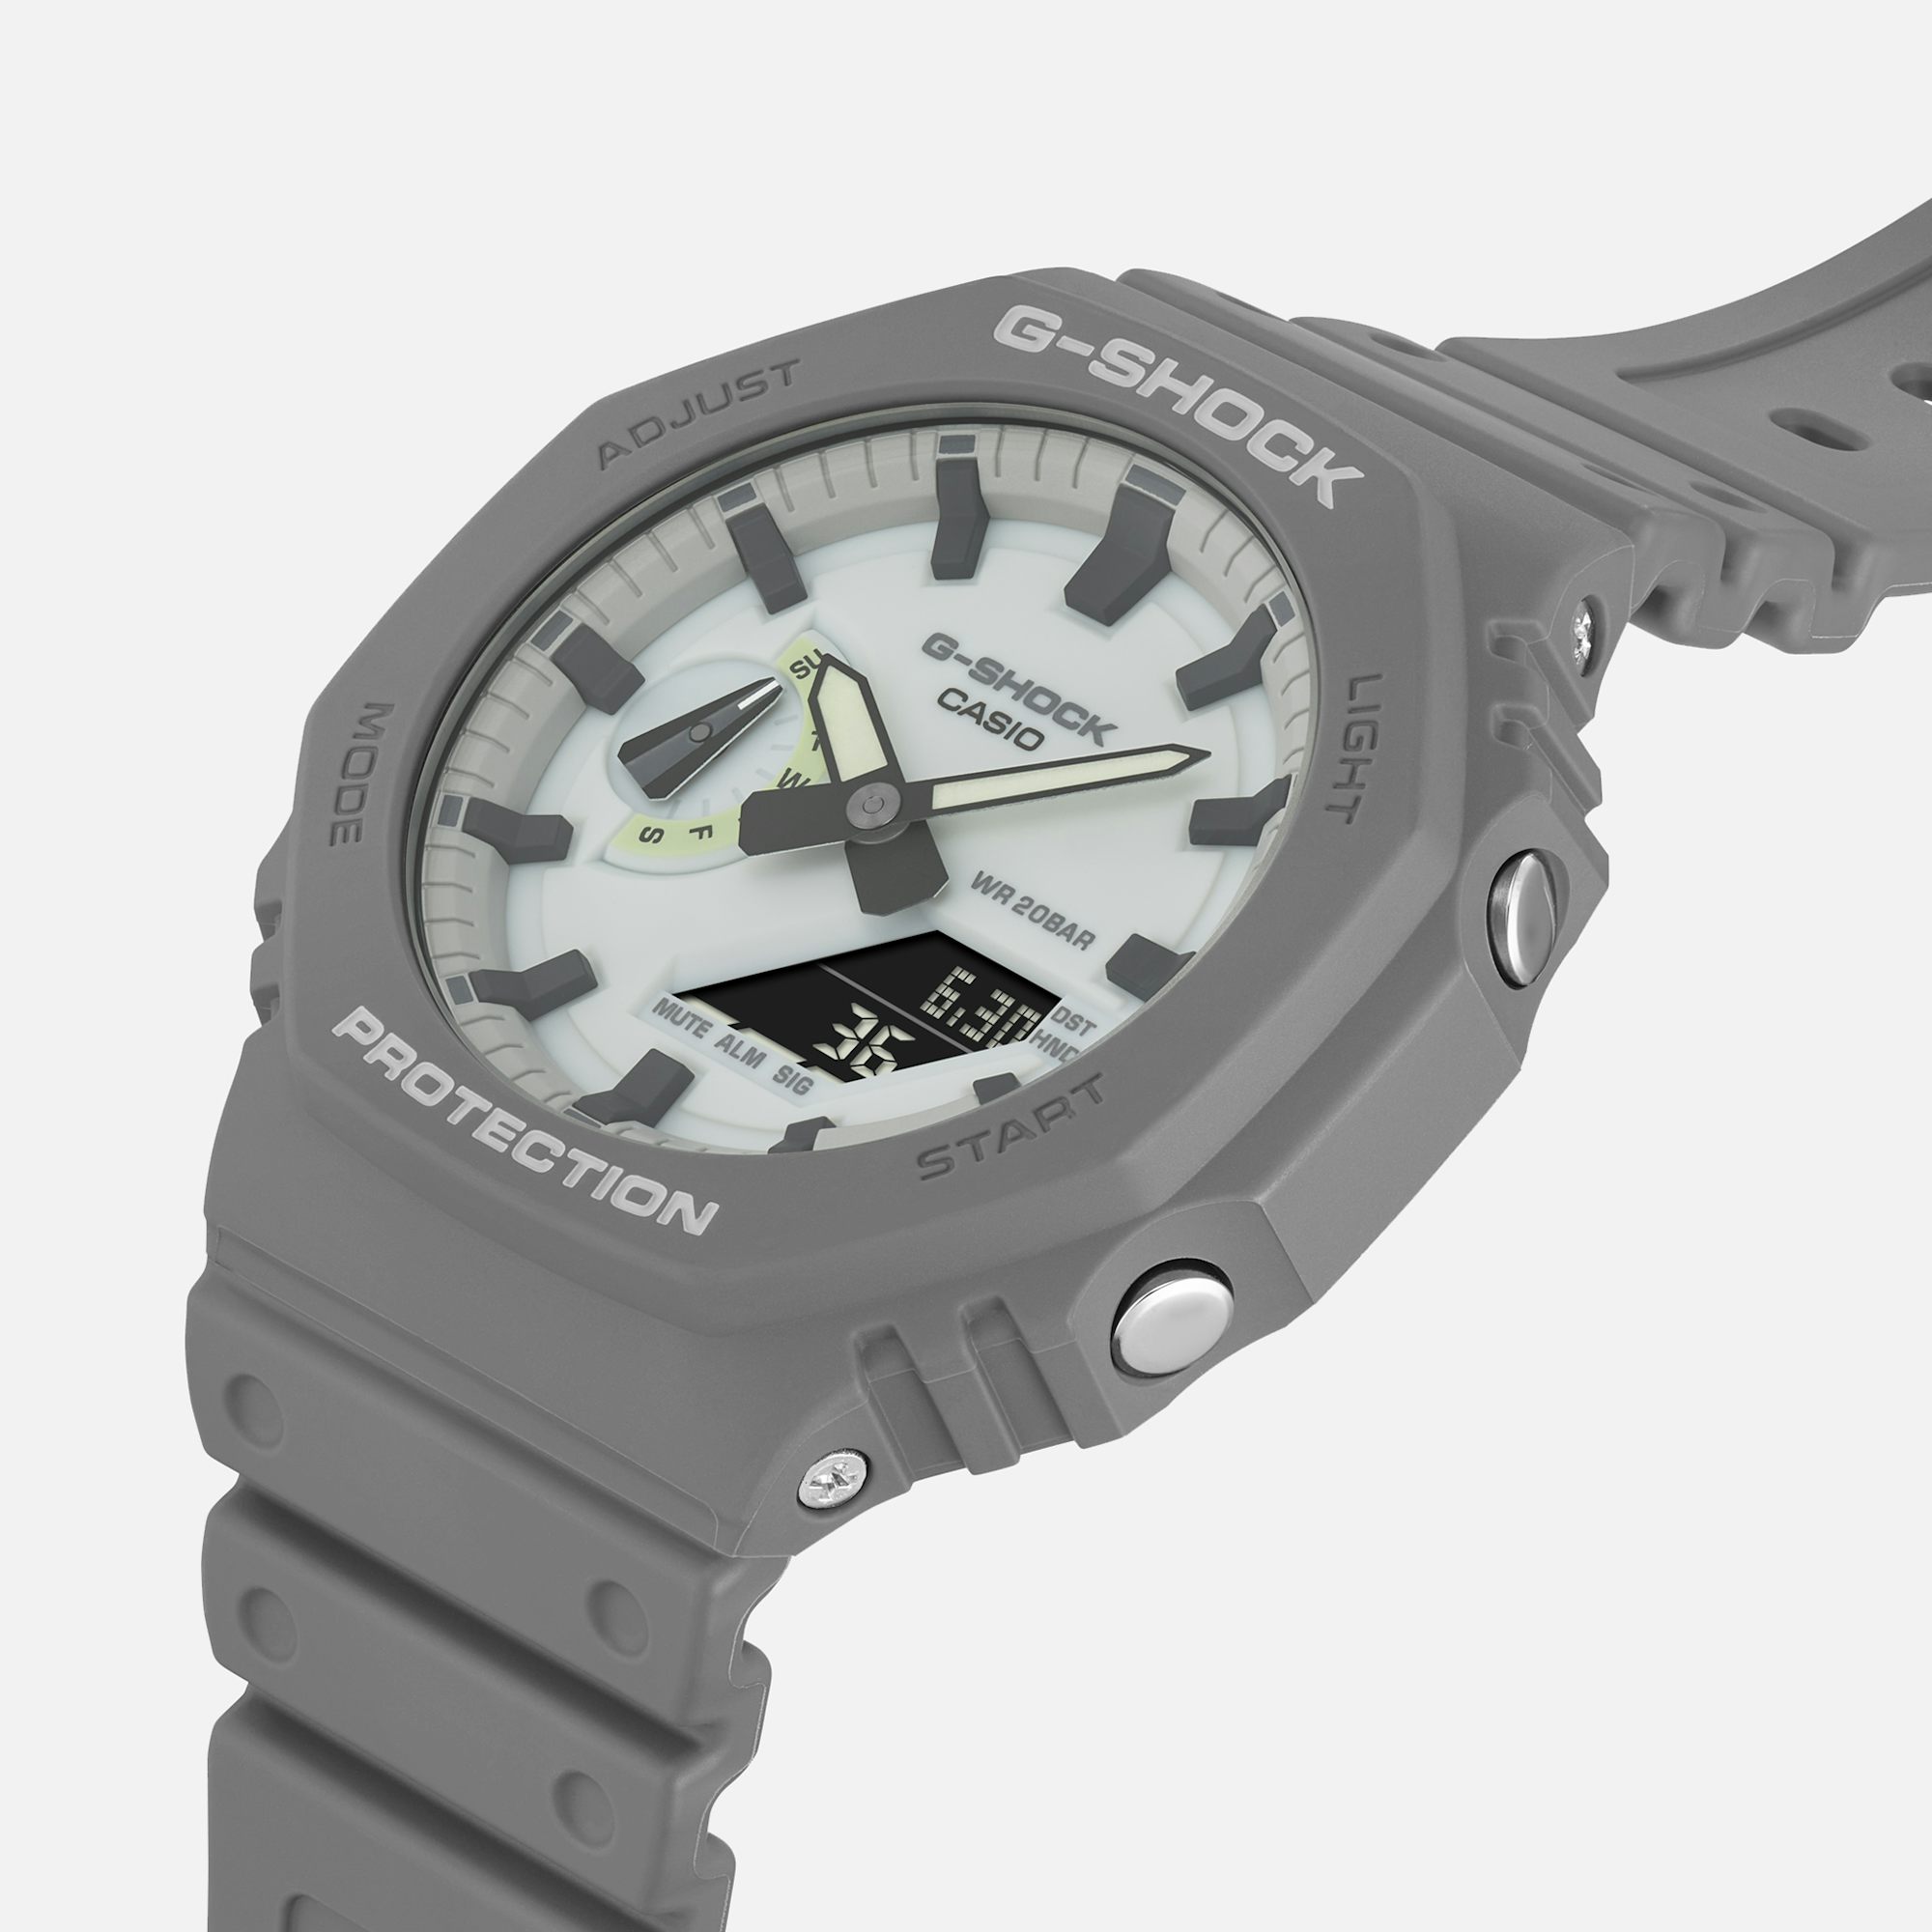 https://www.hodinkee.com/articles/g-shocks-latest-hidden-glow-series-adds-a-phosphorescent-twist-to-three-of-its-most-popular-designs/preview/09ed69275018f5c3bc16c136942e598b